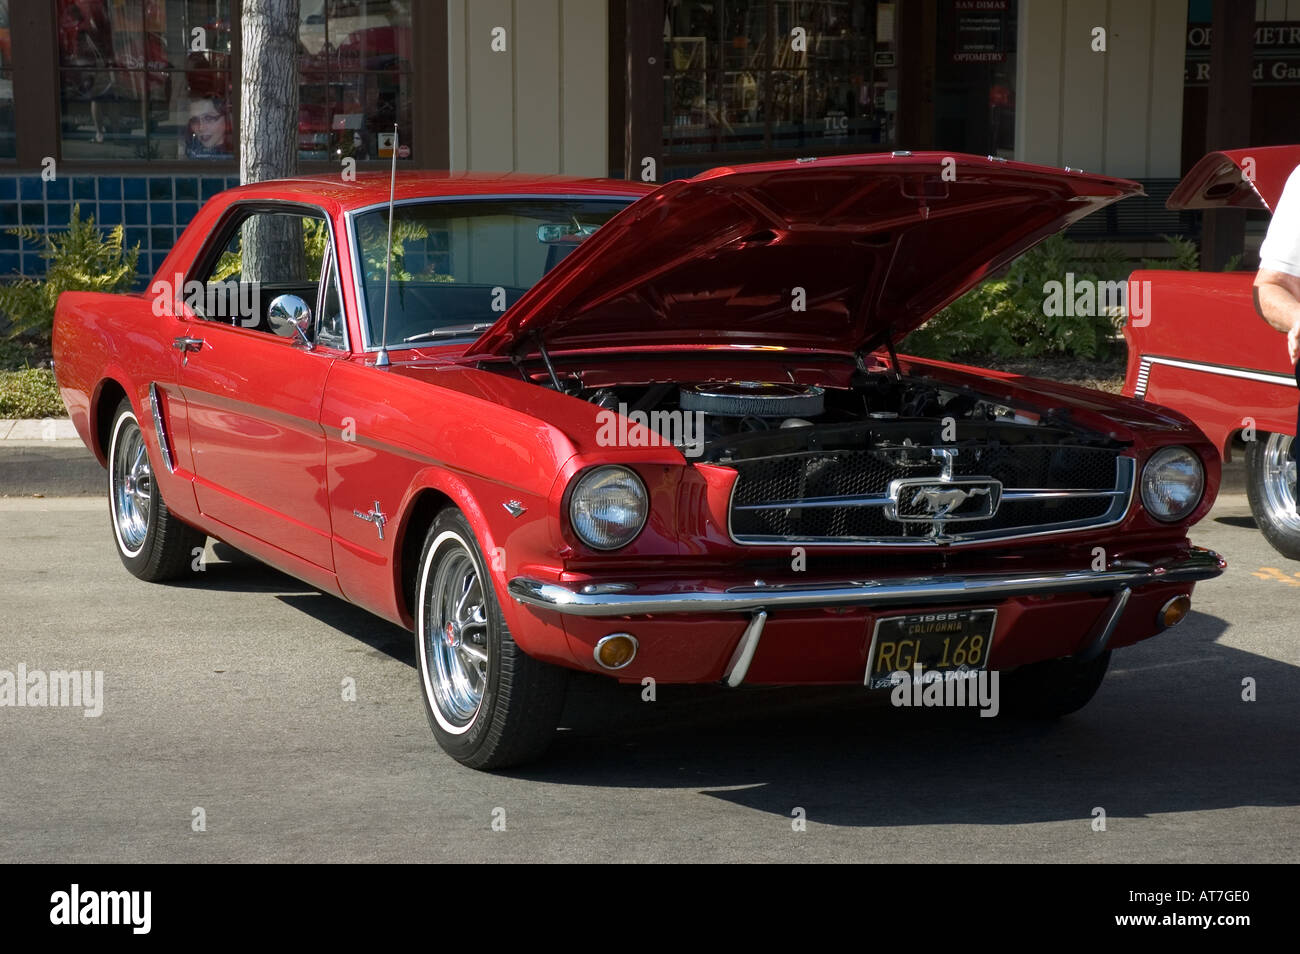 Los Angeles California car show antique customized Ford Mustang 65 1965 red  open hood engine Stock Photo - Alamy